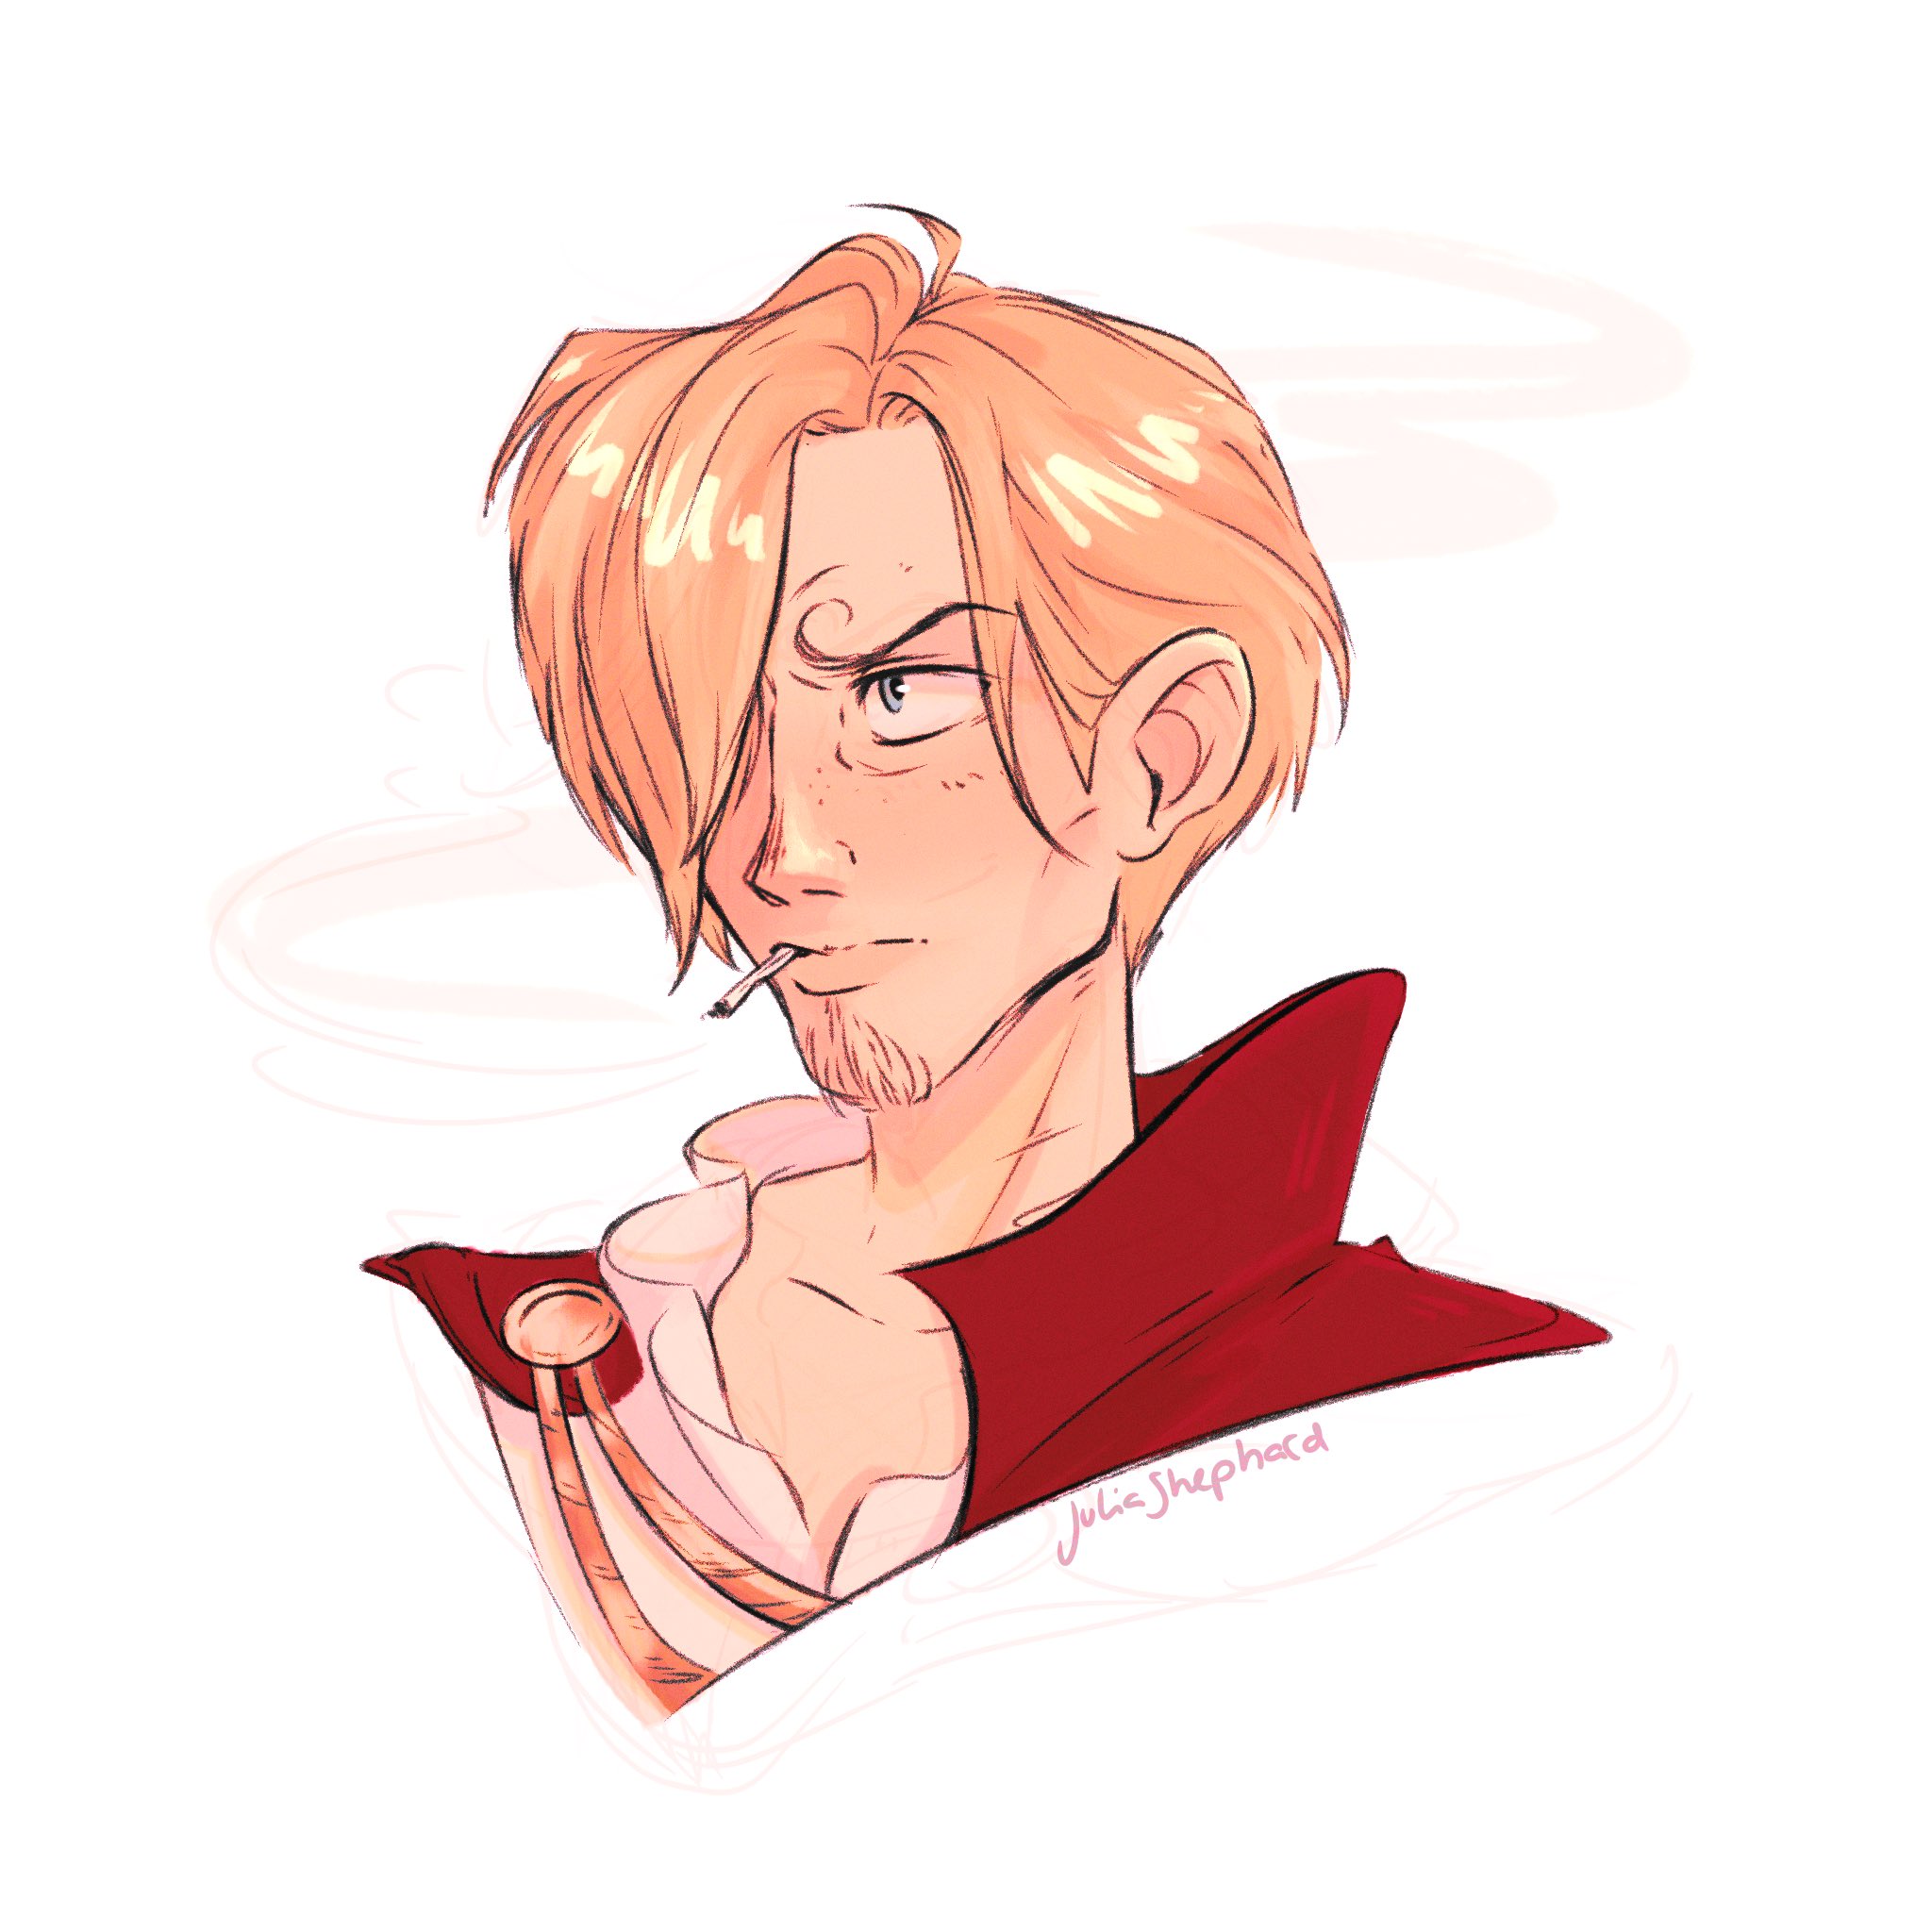 julia 🍒 Looking for work! on X: a quick wci sanji sketch for you